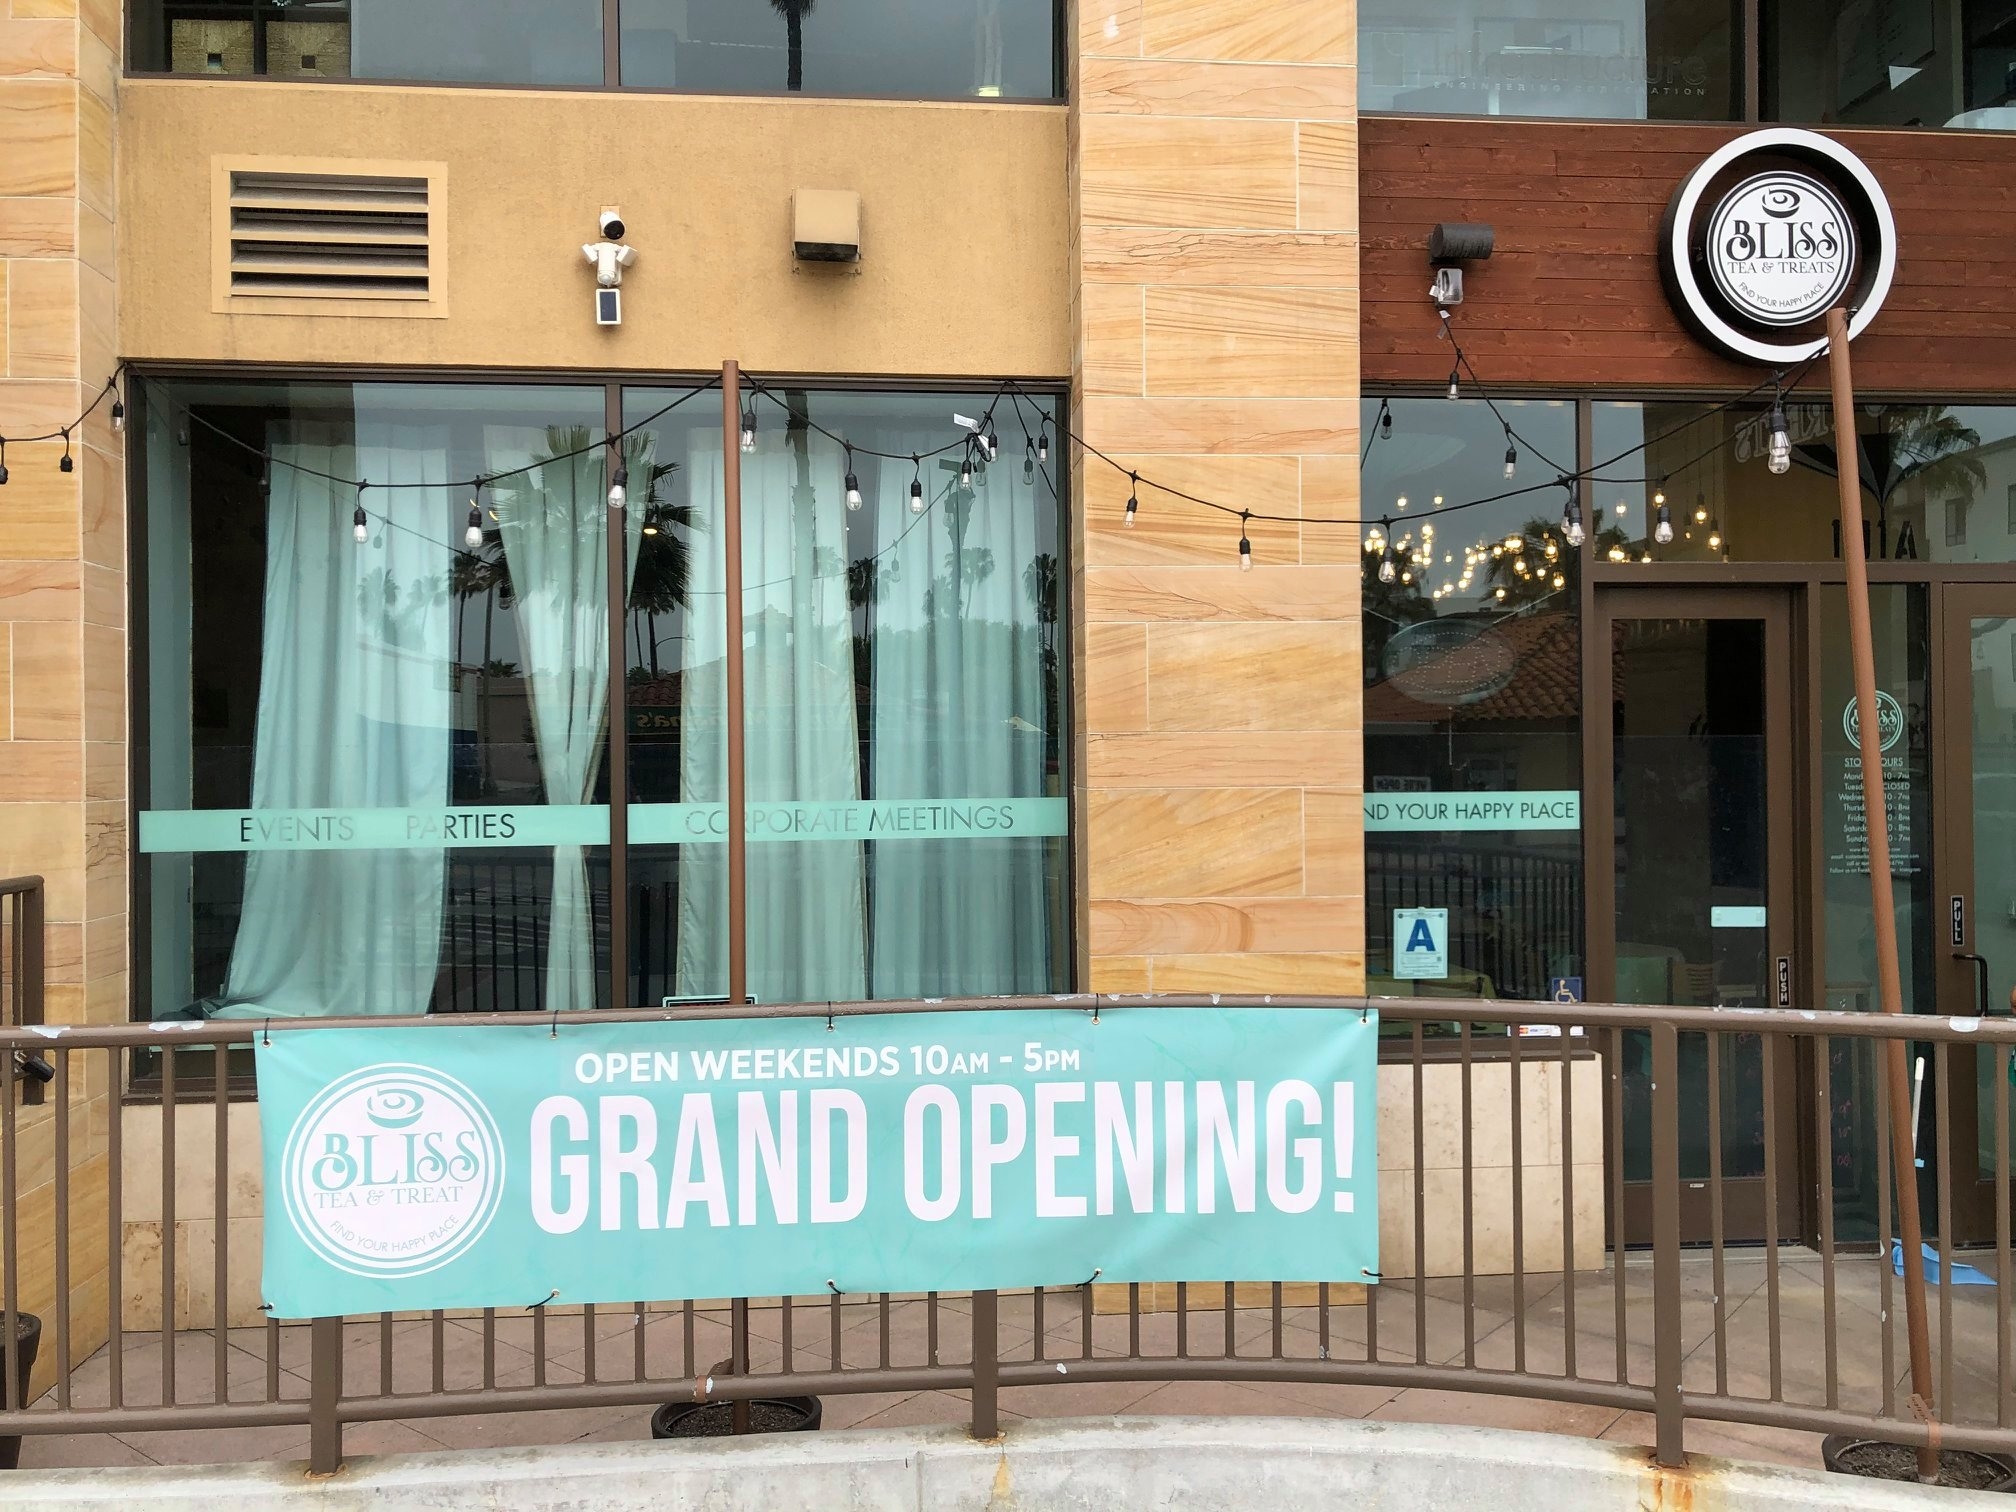 Bliss Tea and Treats Grand Opening Banner